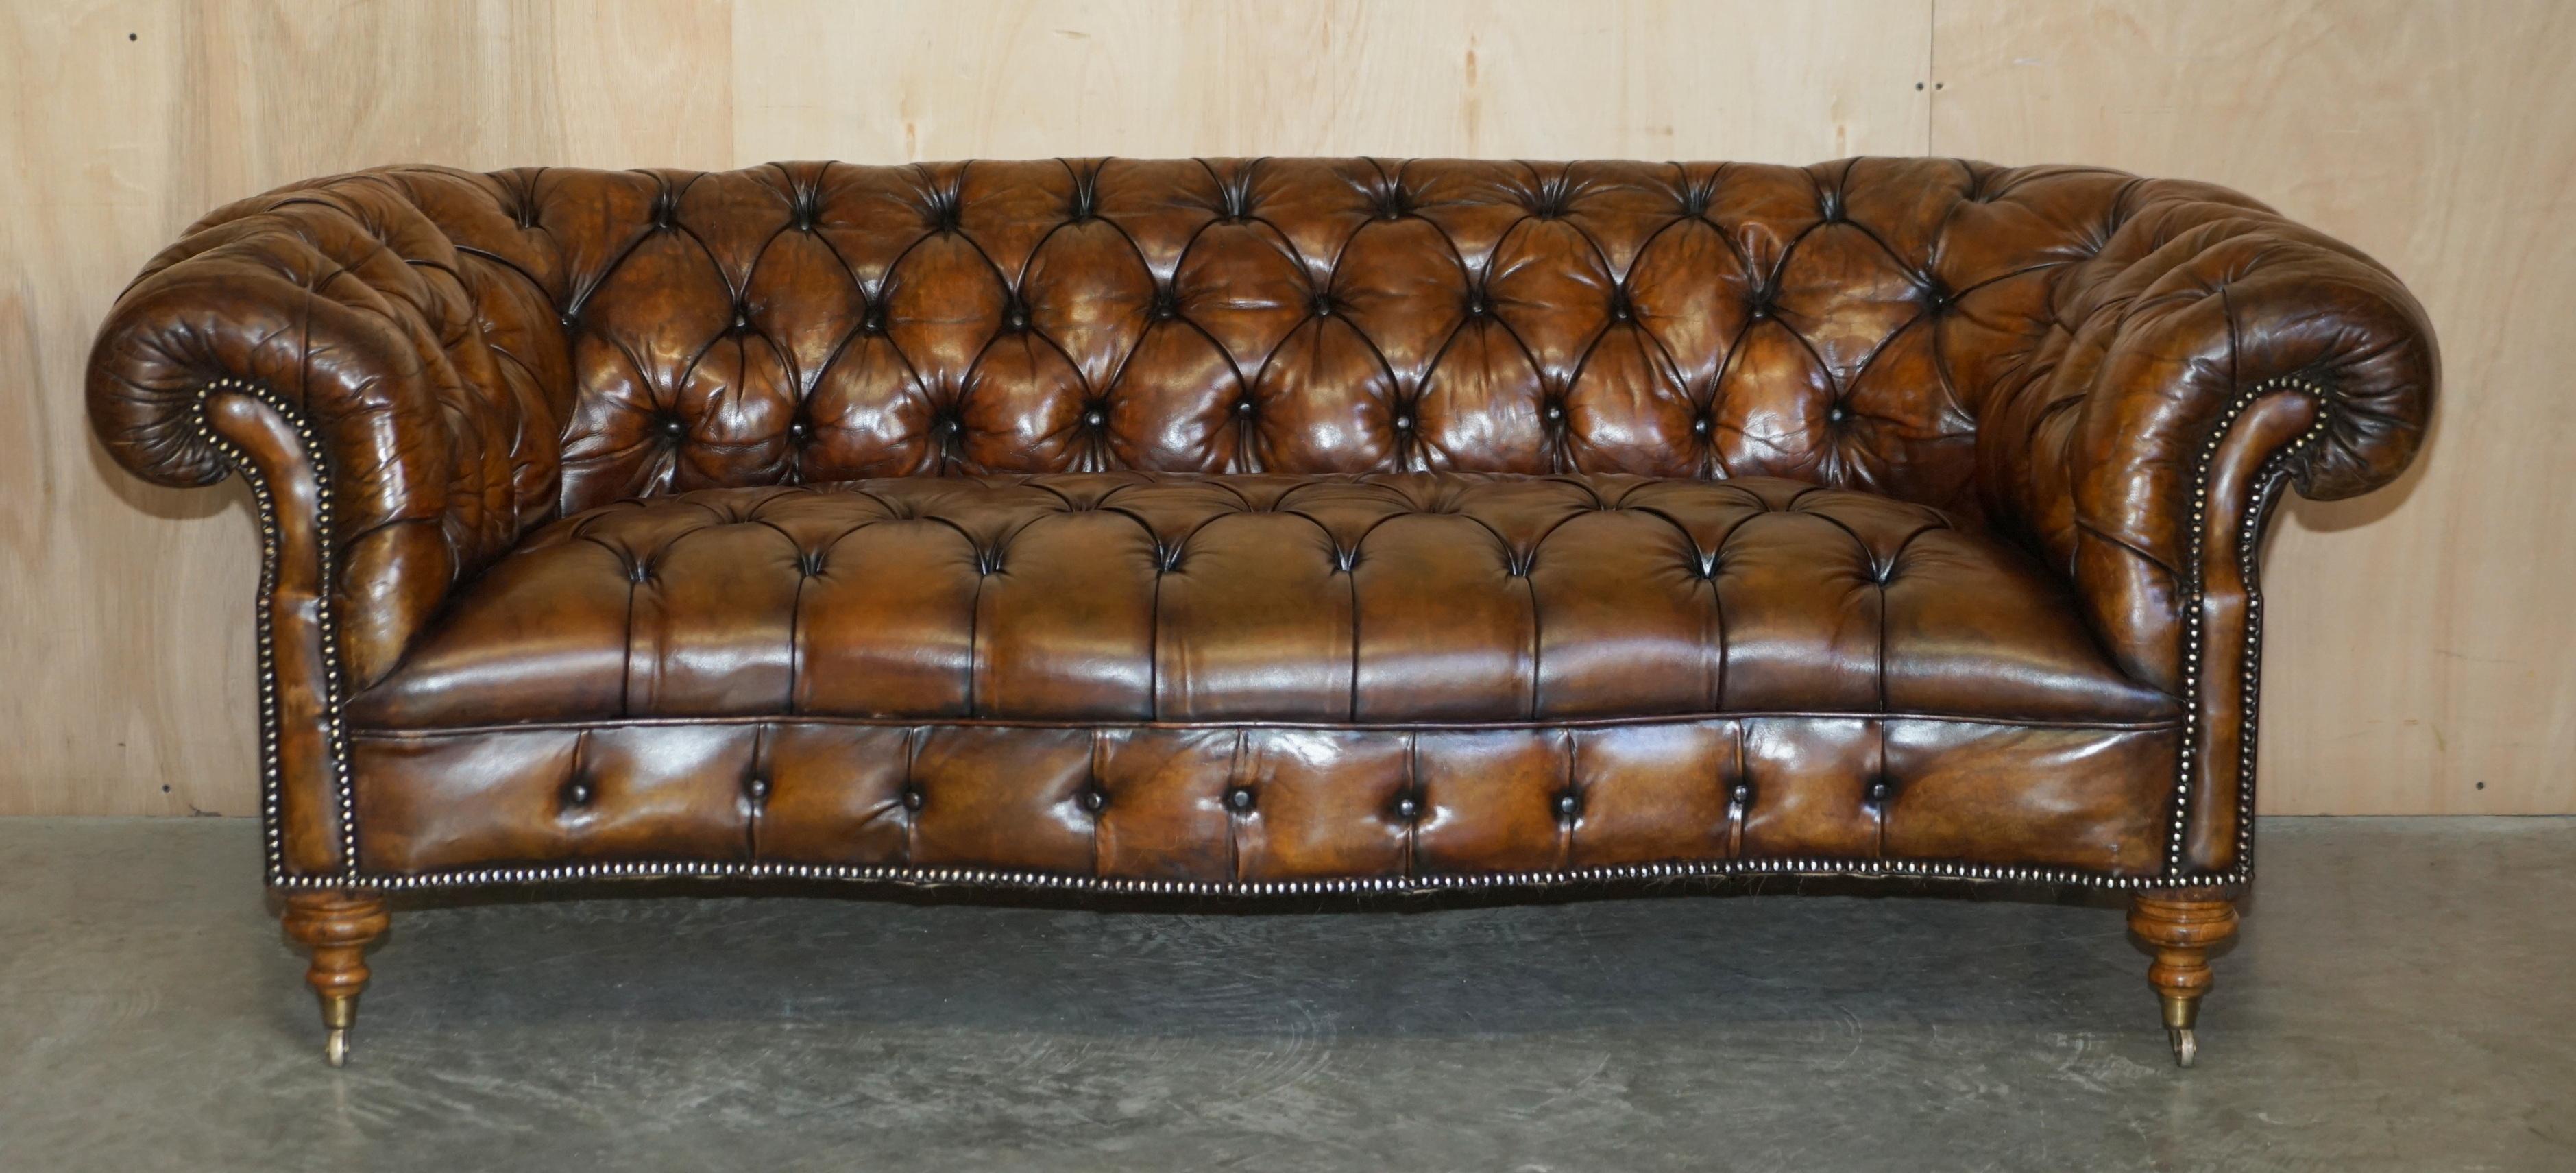 We are delighted to offer for sale this stunning fully restored Victorian hand dyed cigar brown leather serpentine fronted Chesterfield Tufted club sofa after Howard & Son's of Berners Street

This sofa is as rare as they come, it’s a period